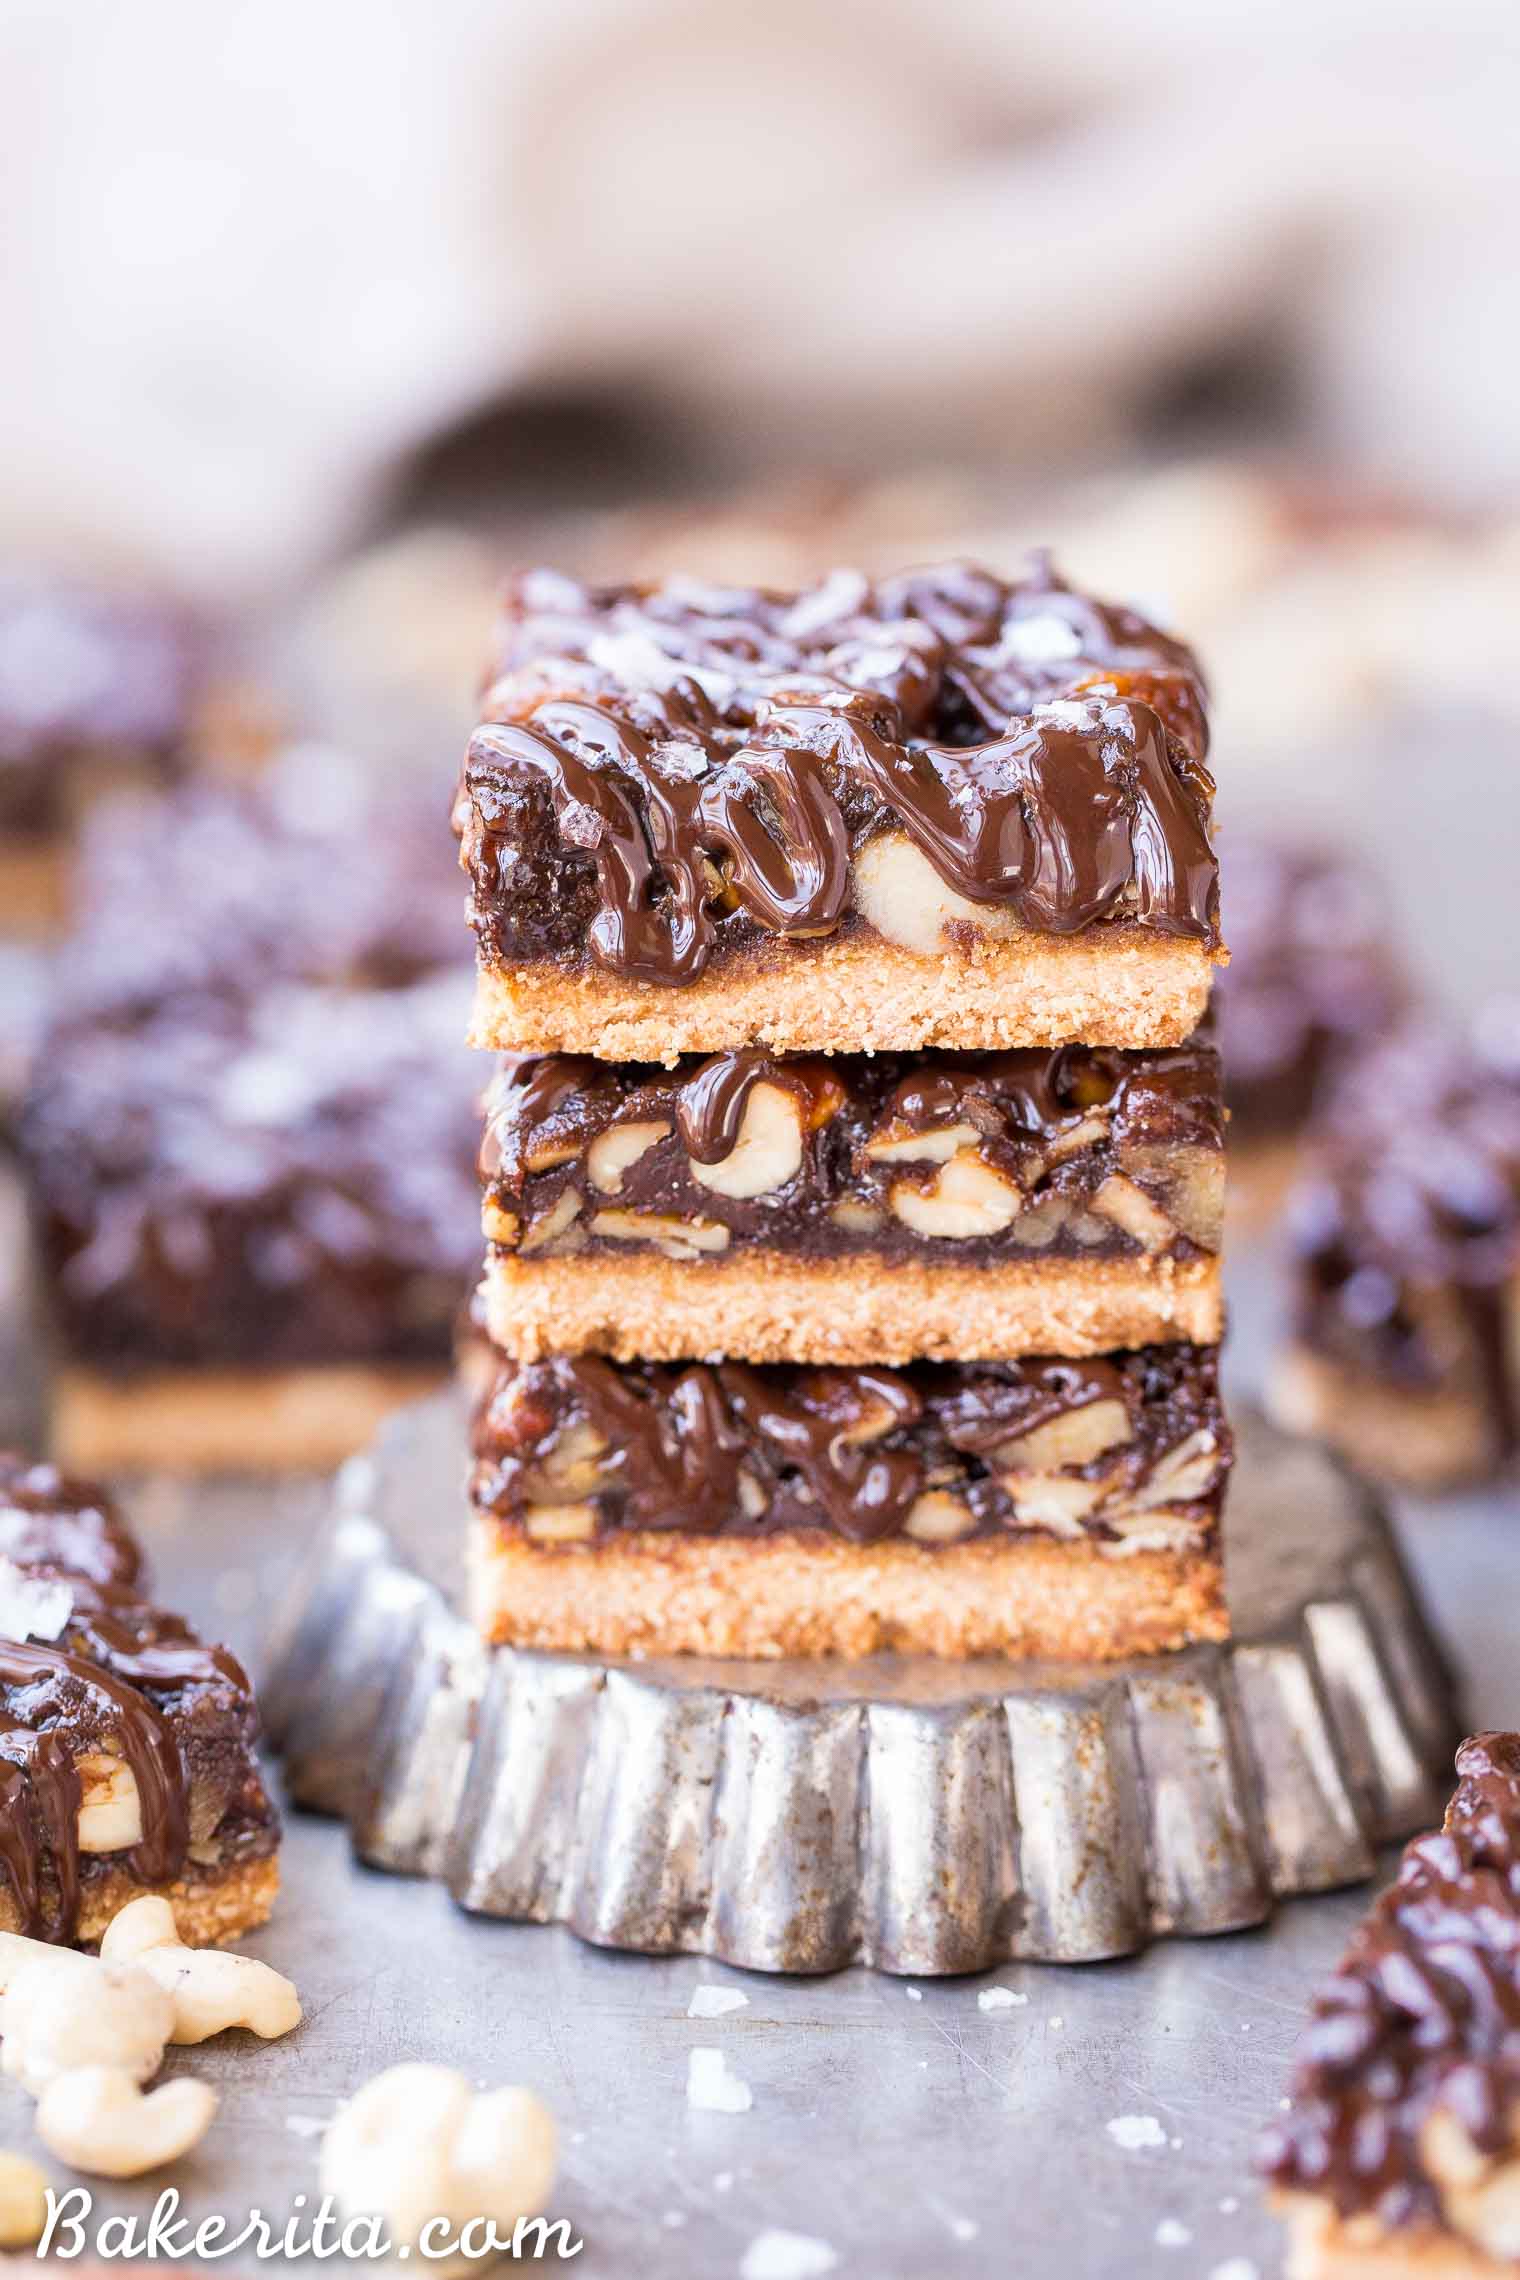 These Salted Chocolate Mixed Nut Bars are a scrumptious dessert bar that has a gooey, nutty center on top of a shortbread crust, topped with dark chocolate and flaky sea salt. These gluten free, paleo, and vegan bars are an irresistible way to satisfy your sweet tooth.